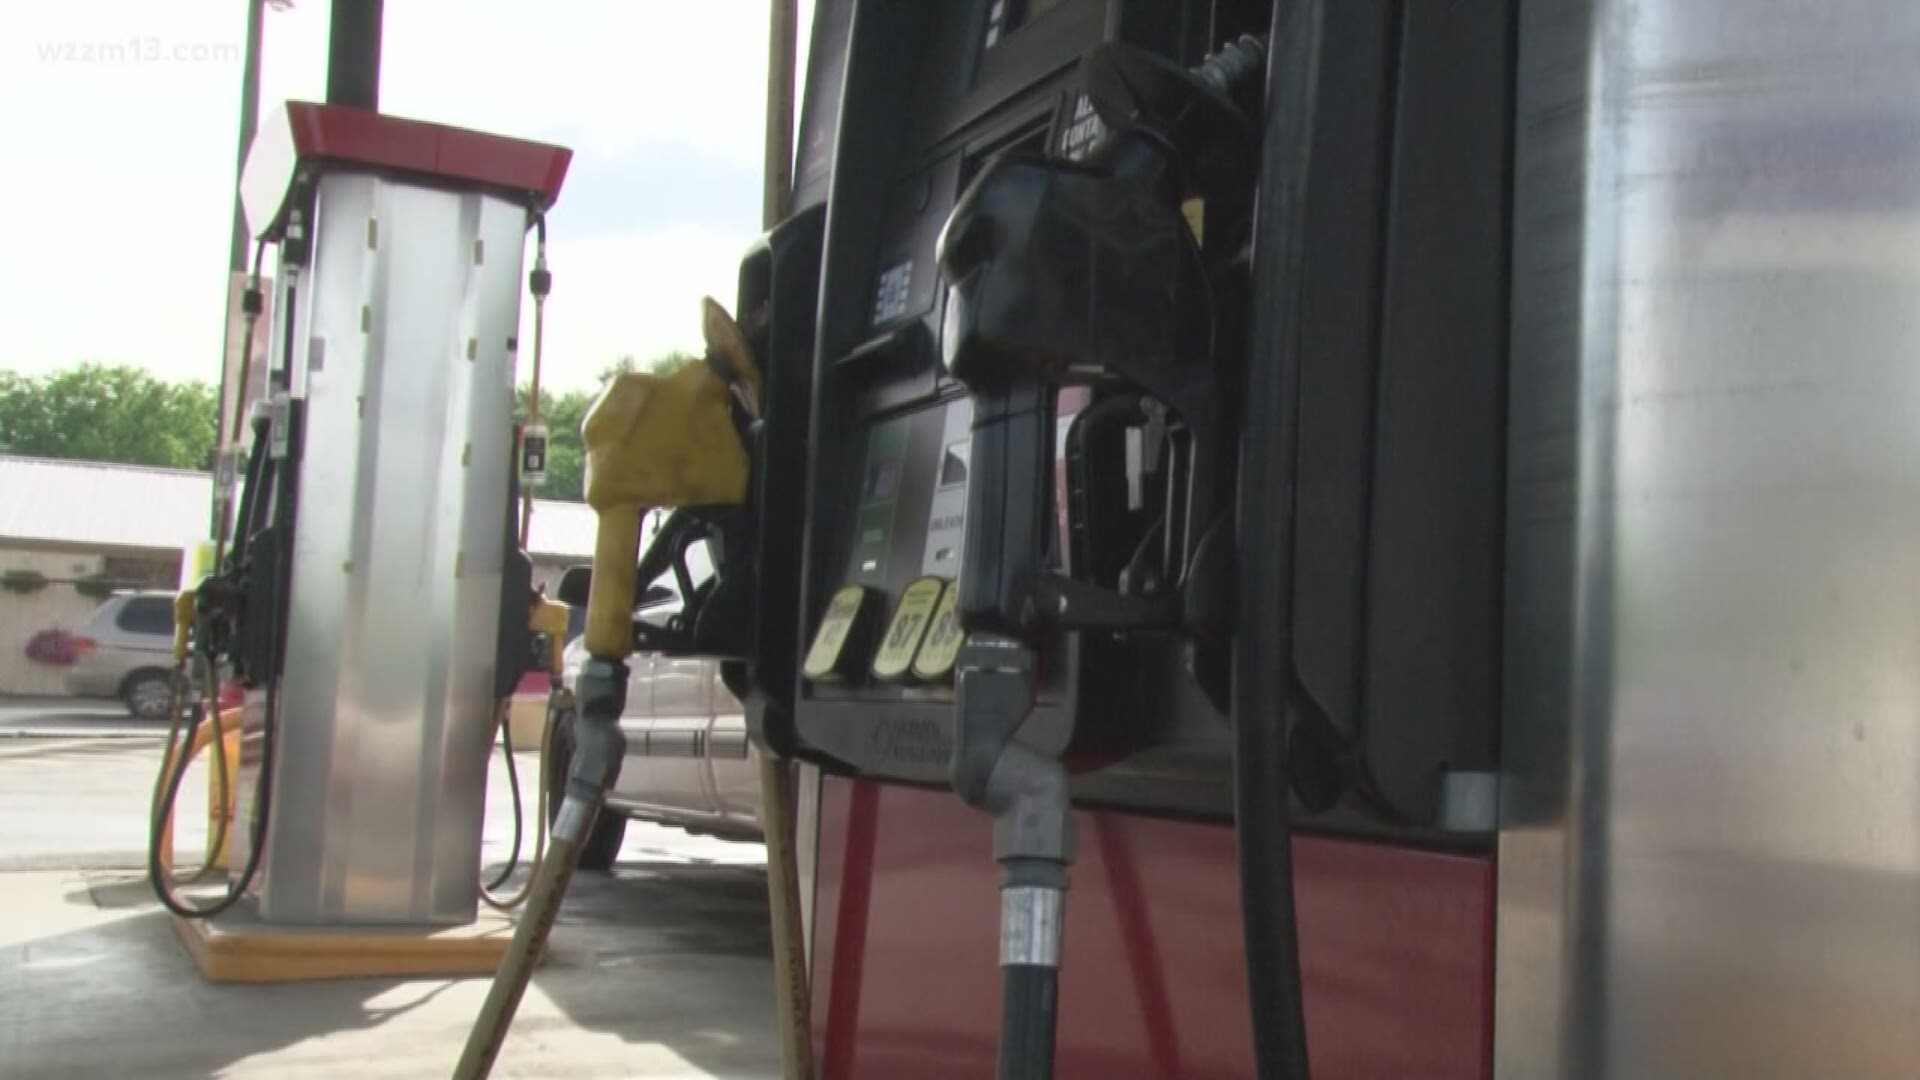 Police in Coloma Township are warning people to check gas pumps before use after a razor blade fell from the handle of a pump on Tuesday.